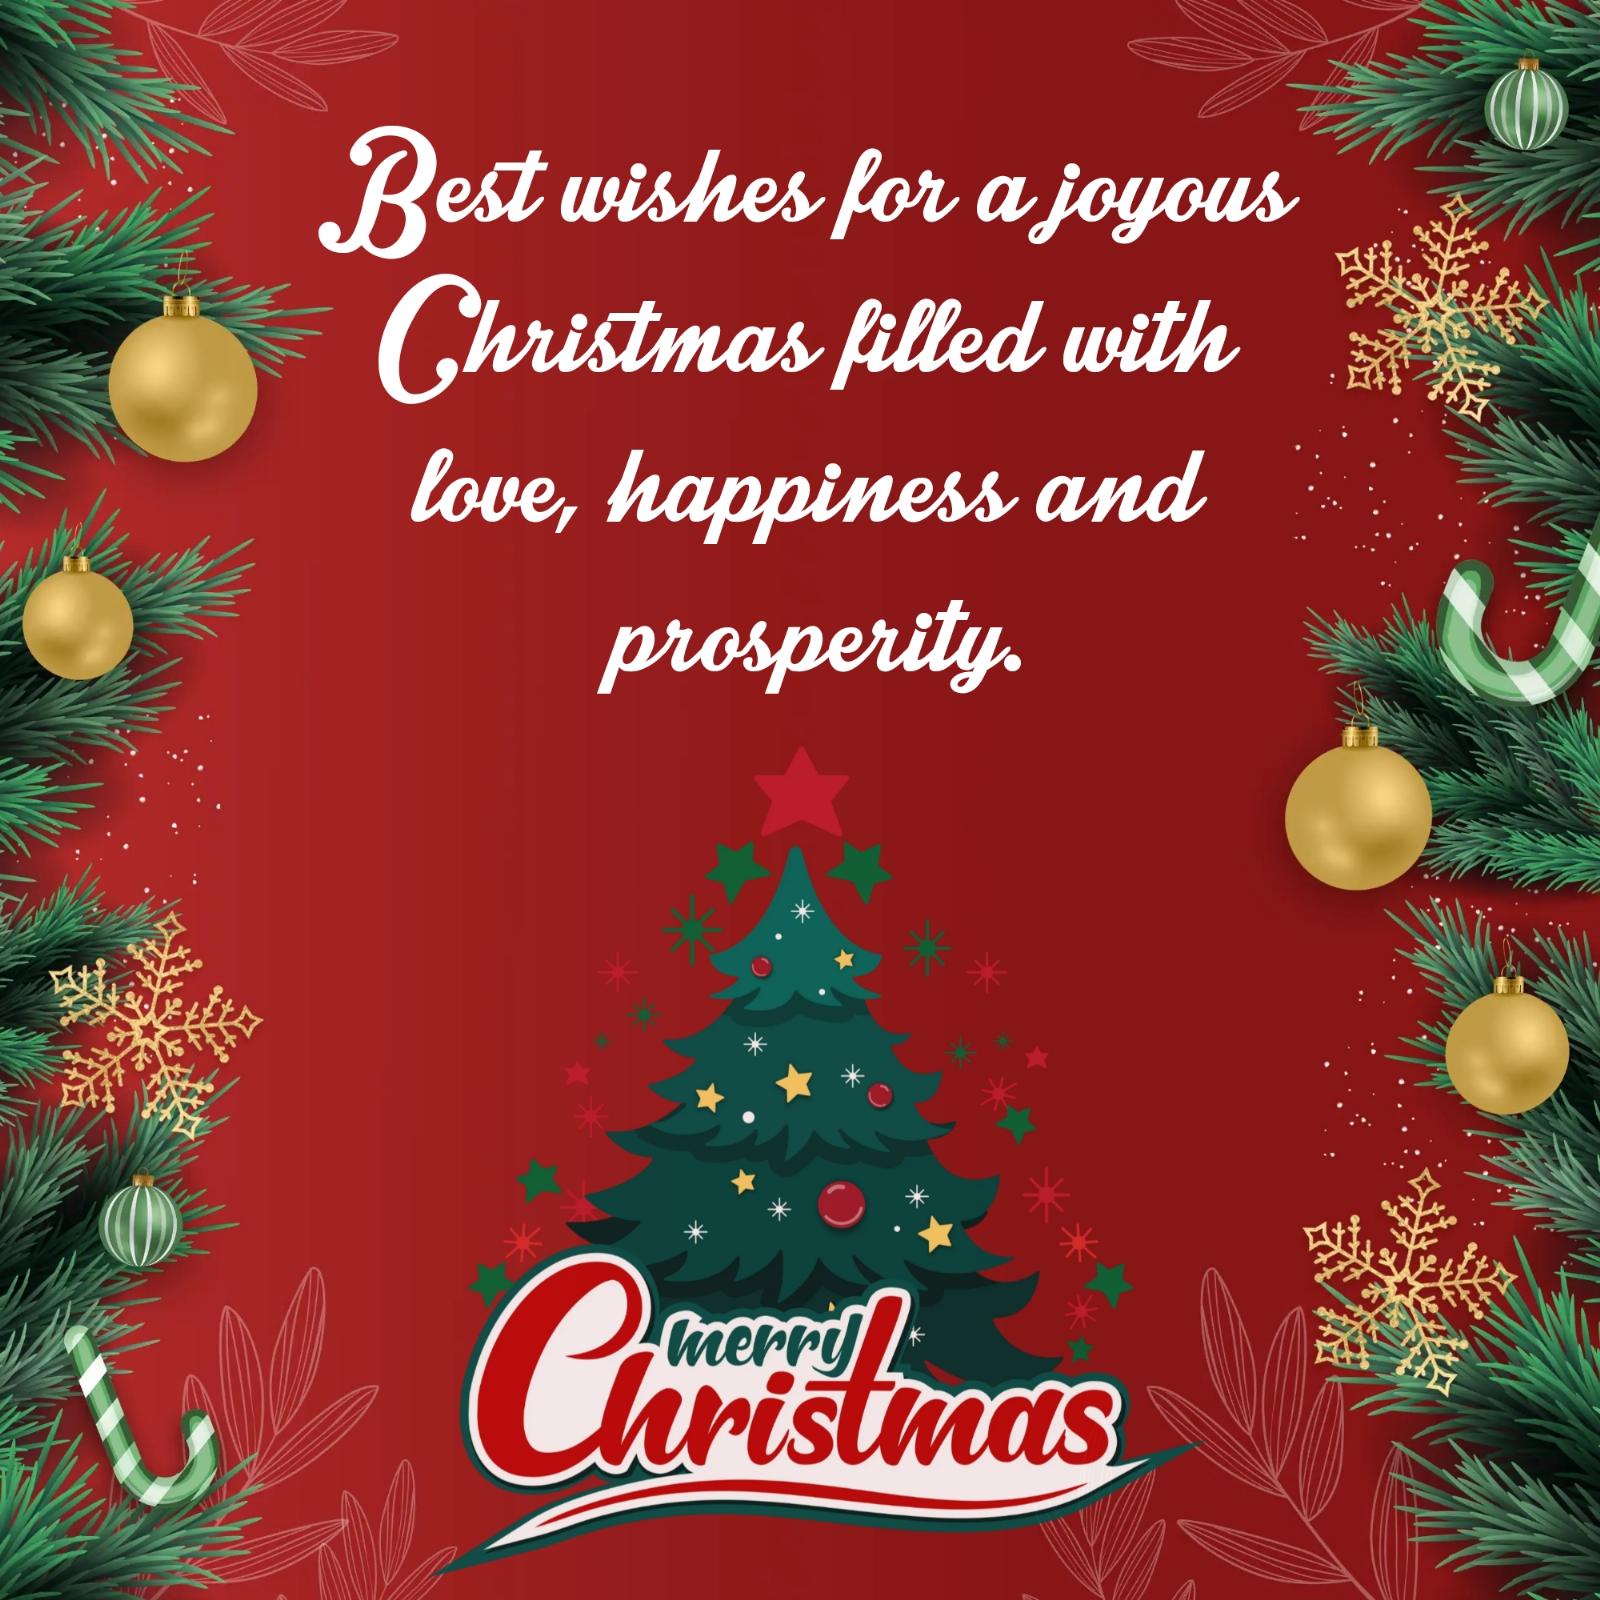 Best wishes for a joyous Christmas filled with love